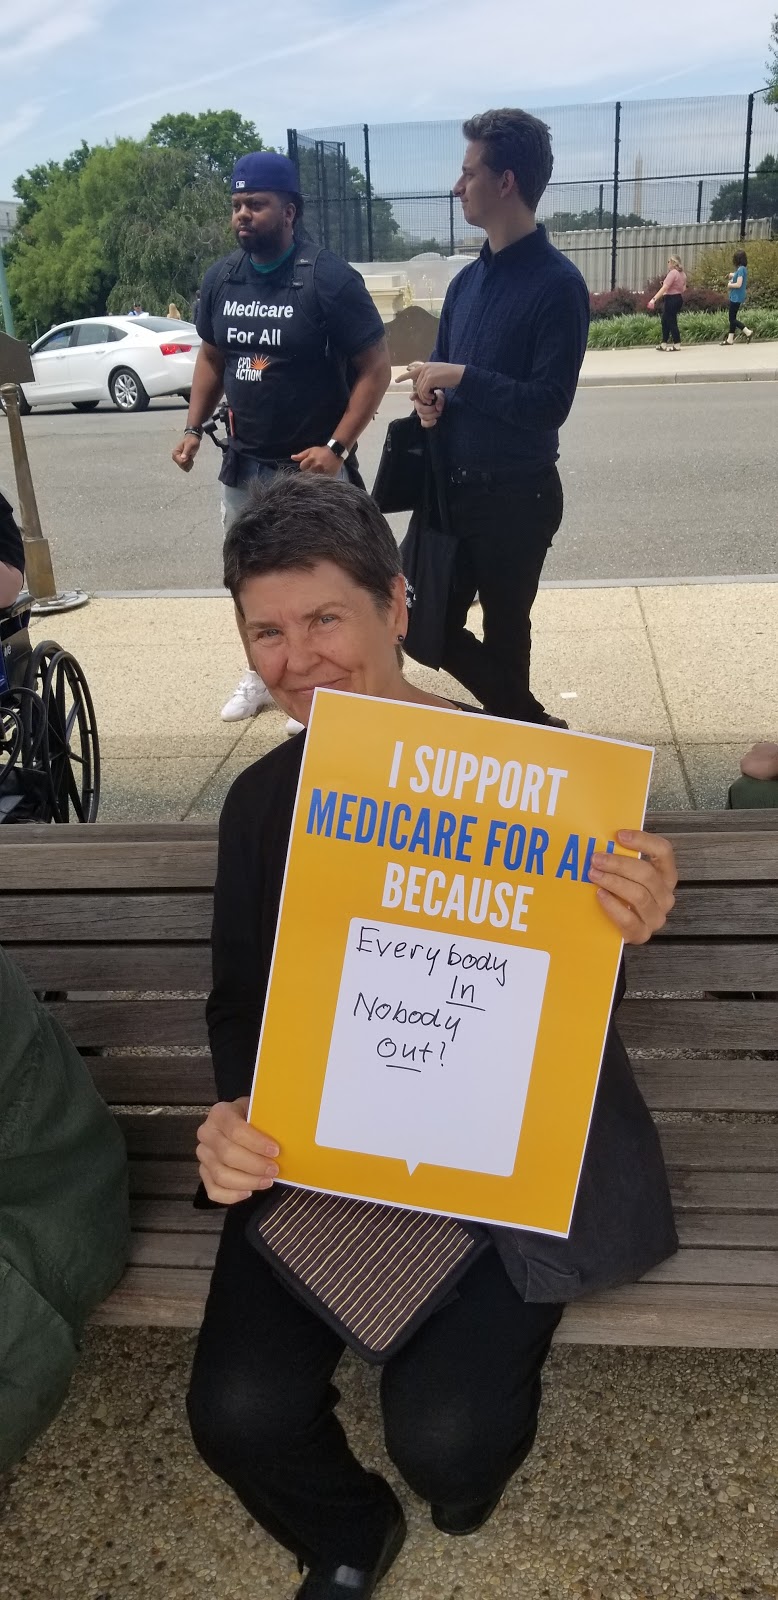 Medicare for All supporter with a sign